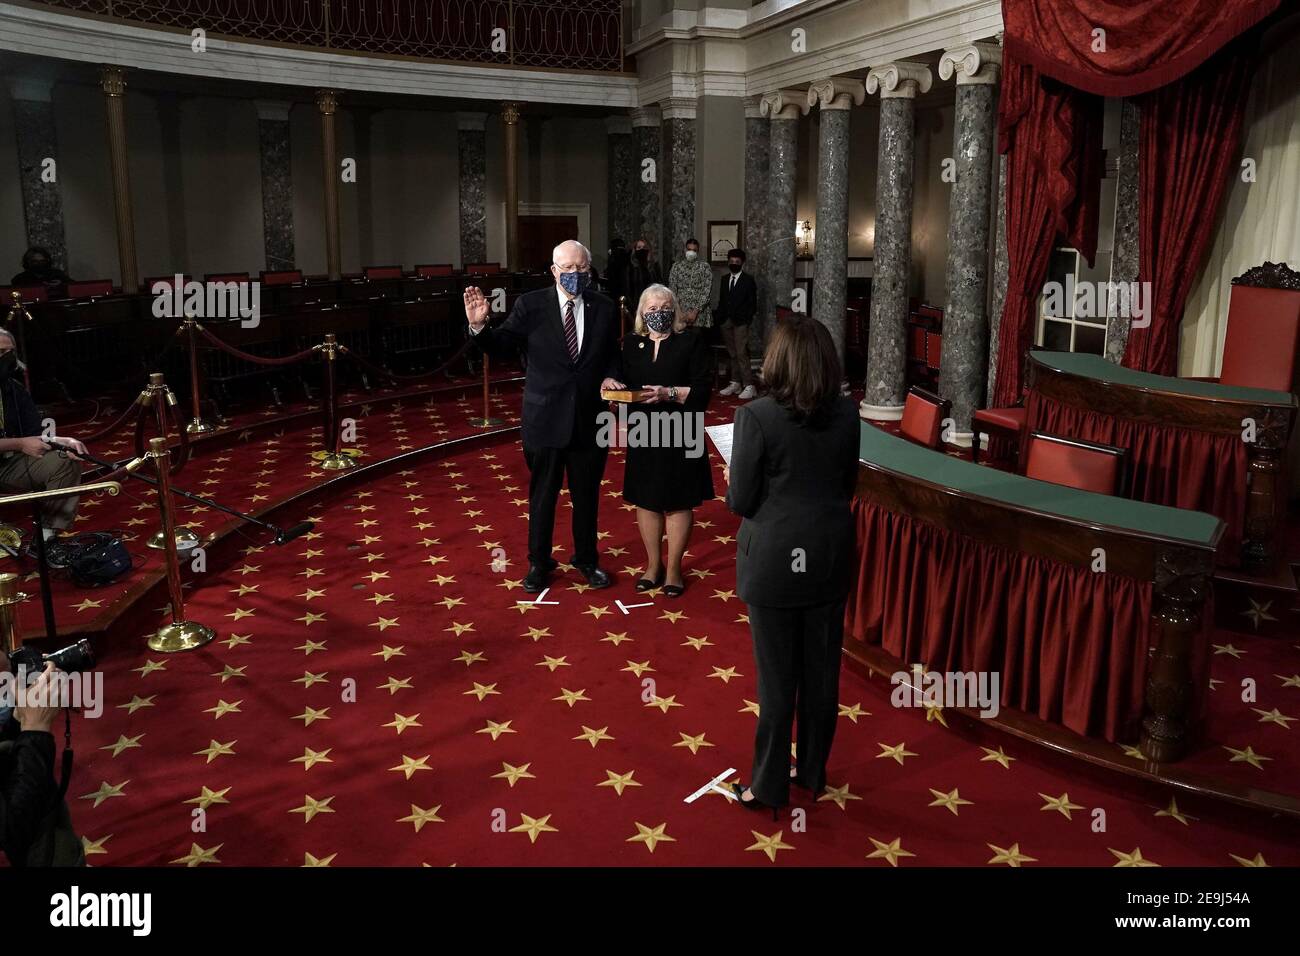 Sen. Patrick Leahy (D-Vt.) participates in a ceremonial swearing in photo op with his wife Marcelle Pomerleau and Vice President Harris on Thursday, February 4, 2021 in the Old Senate Chamber at the U.S. Capitol in Washington, DC.Credit: Greg Nash/Pool via CNP | usage worldwide Stock Photo